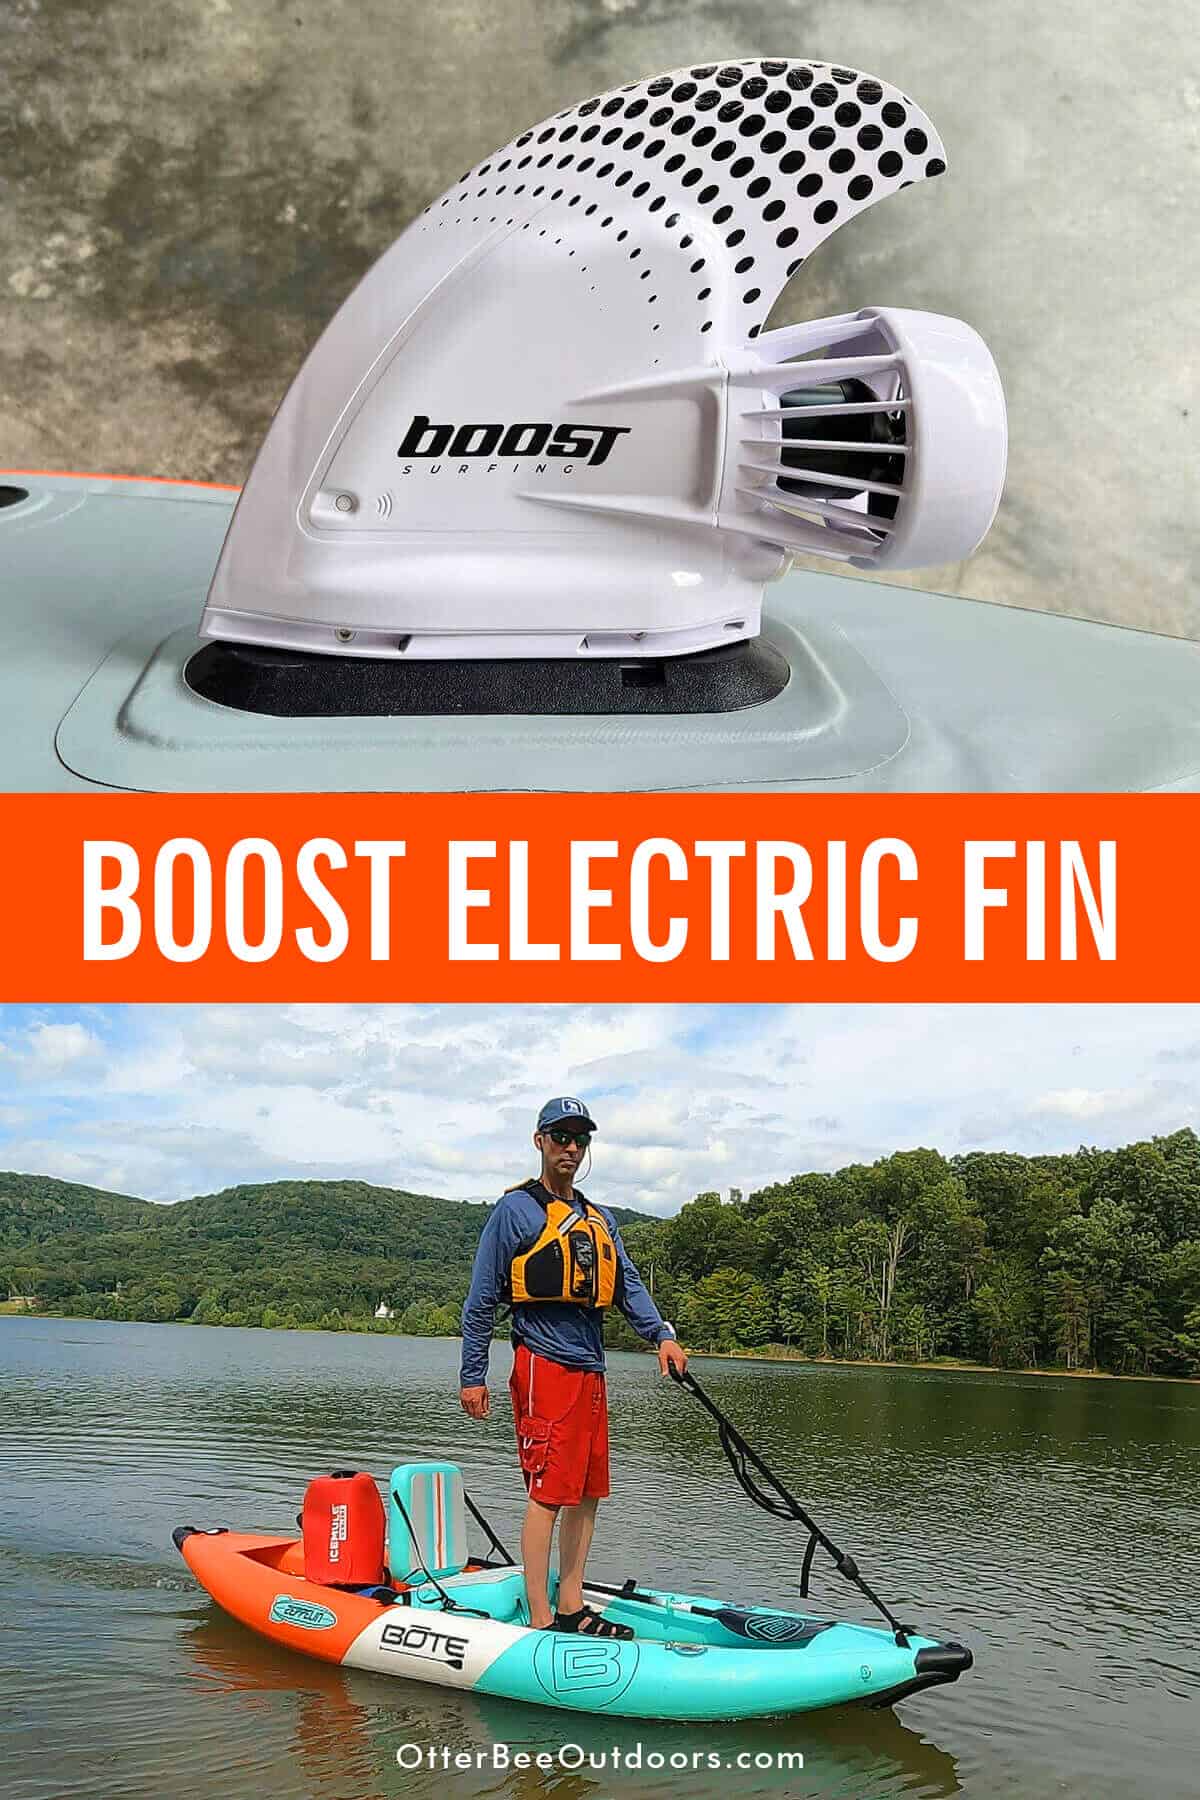 Revolutionize your paddling experience with the Boost Fin! This motorized fin attachment for inflatable kayaks and SUPs offers enhanced control, increased speed, and easy installation, making your time on the water more enjoyable. Ideal for combating currents and winds, it's a must-have for any water sports enthusiast. Dive into our detailed review to see how the Boost Fin can transform your adventures. Click to read more!